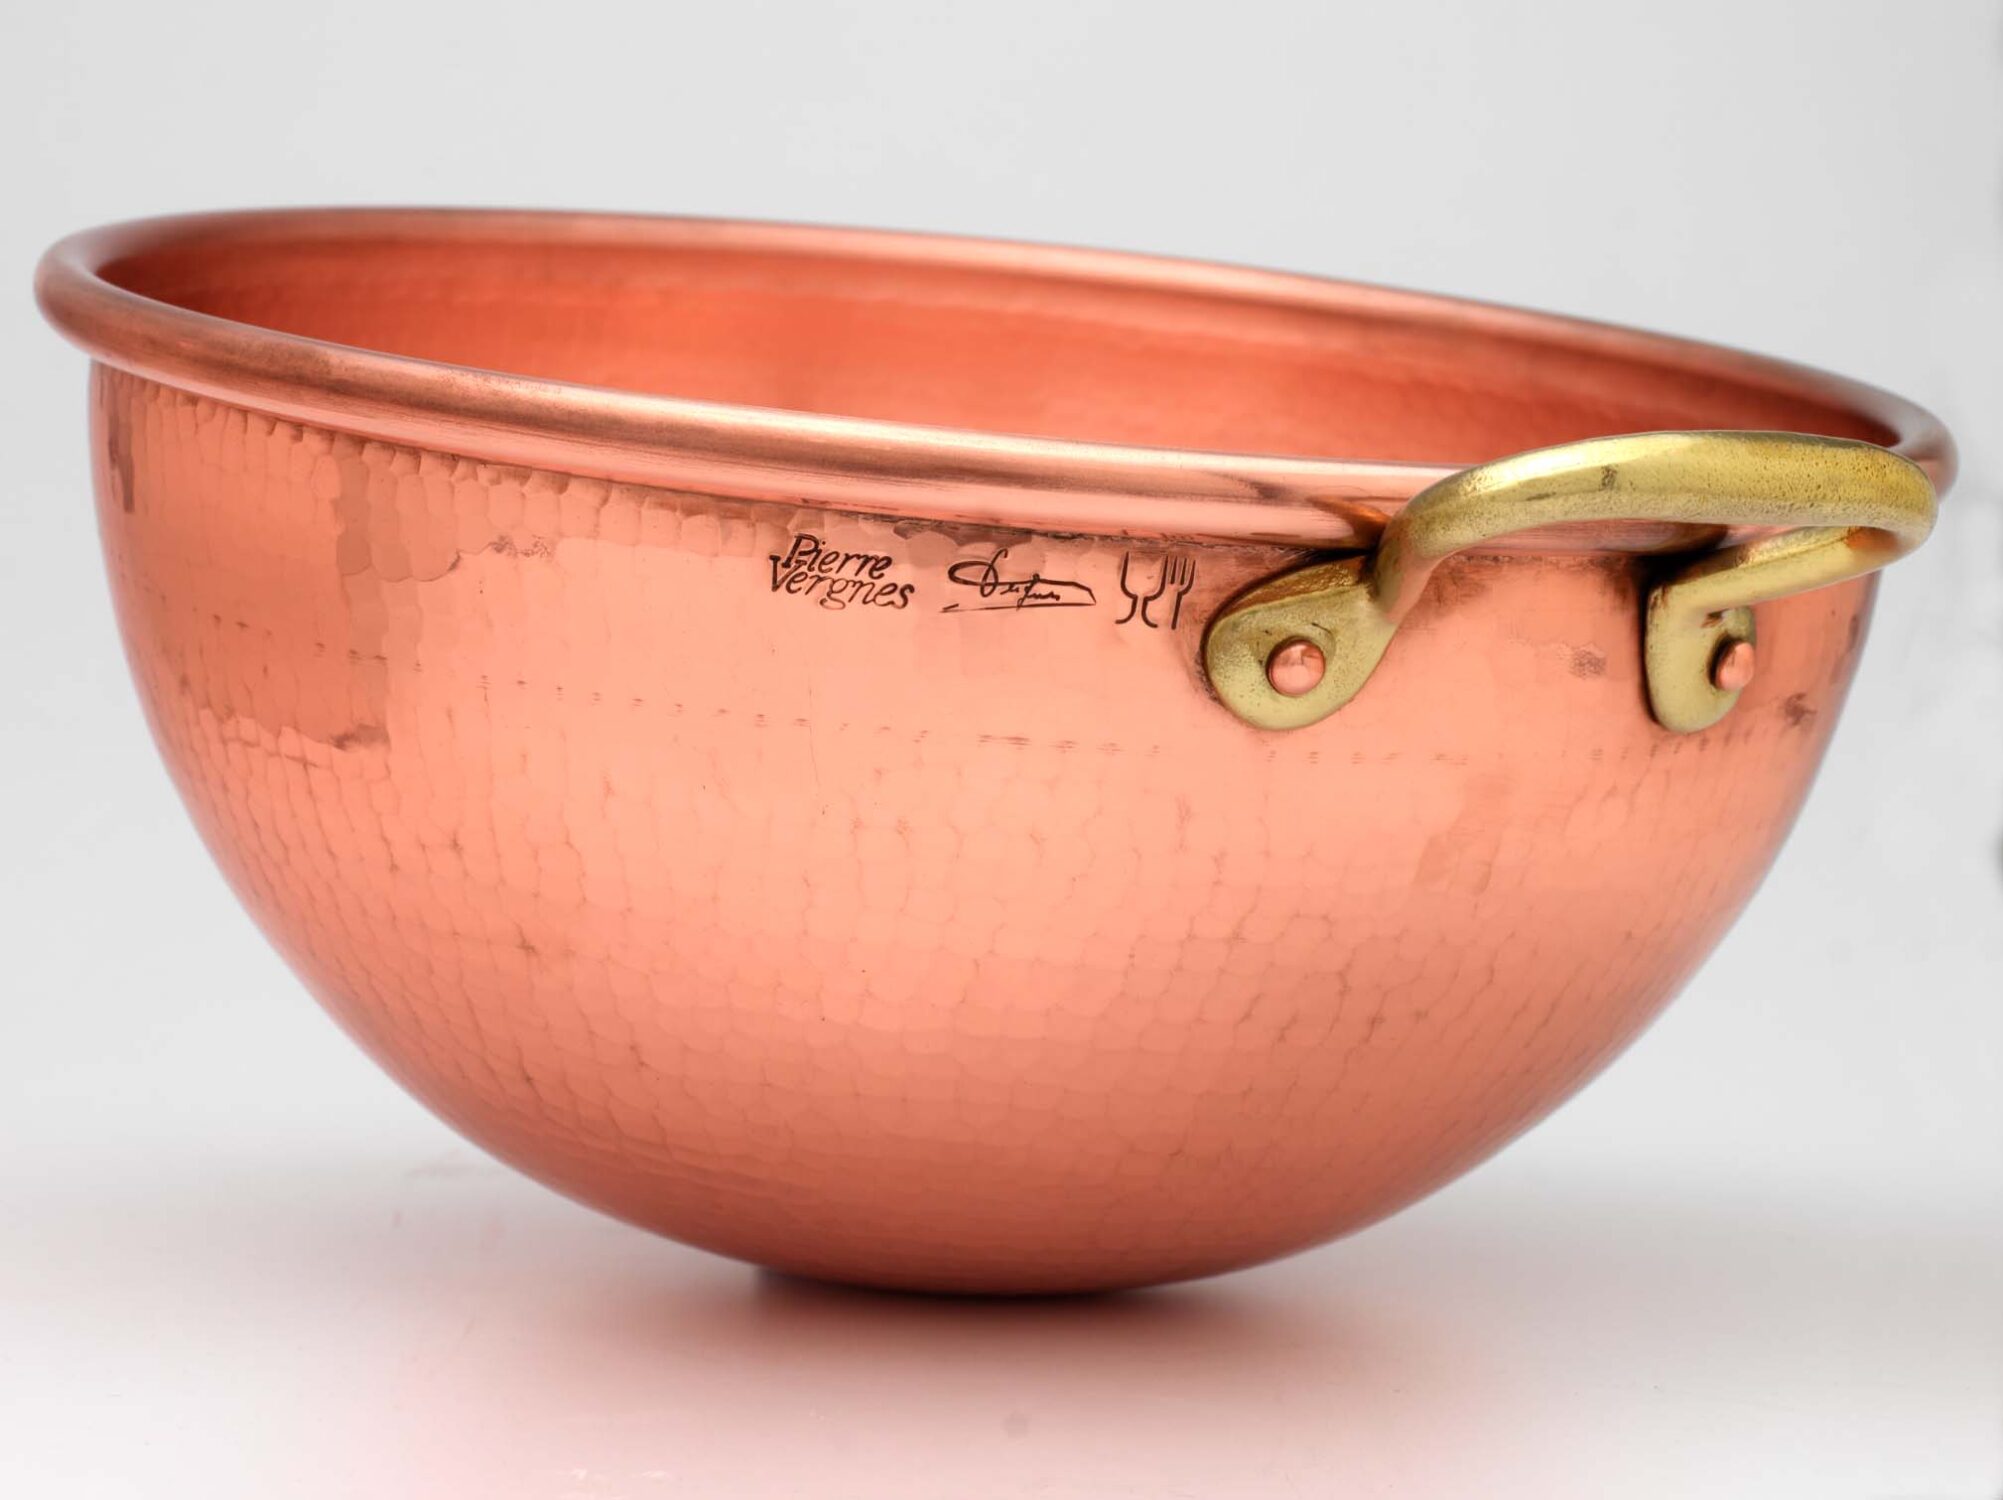 https://frenchcopperstudio.com/wp-content/uploads/2020/01/Copper_Mixing_Bowl_One_Brass_Handle_Hammered-e1639955152597.jpg